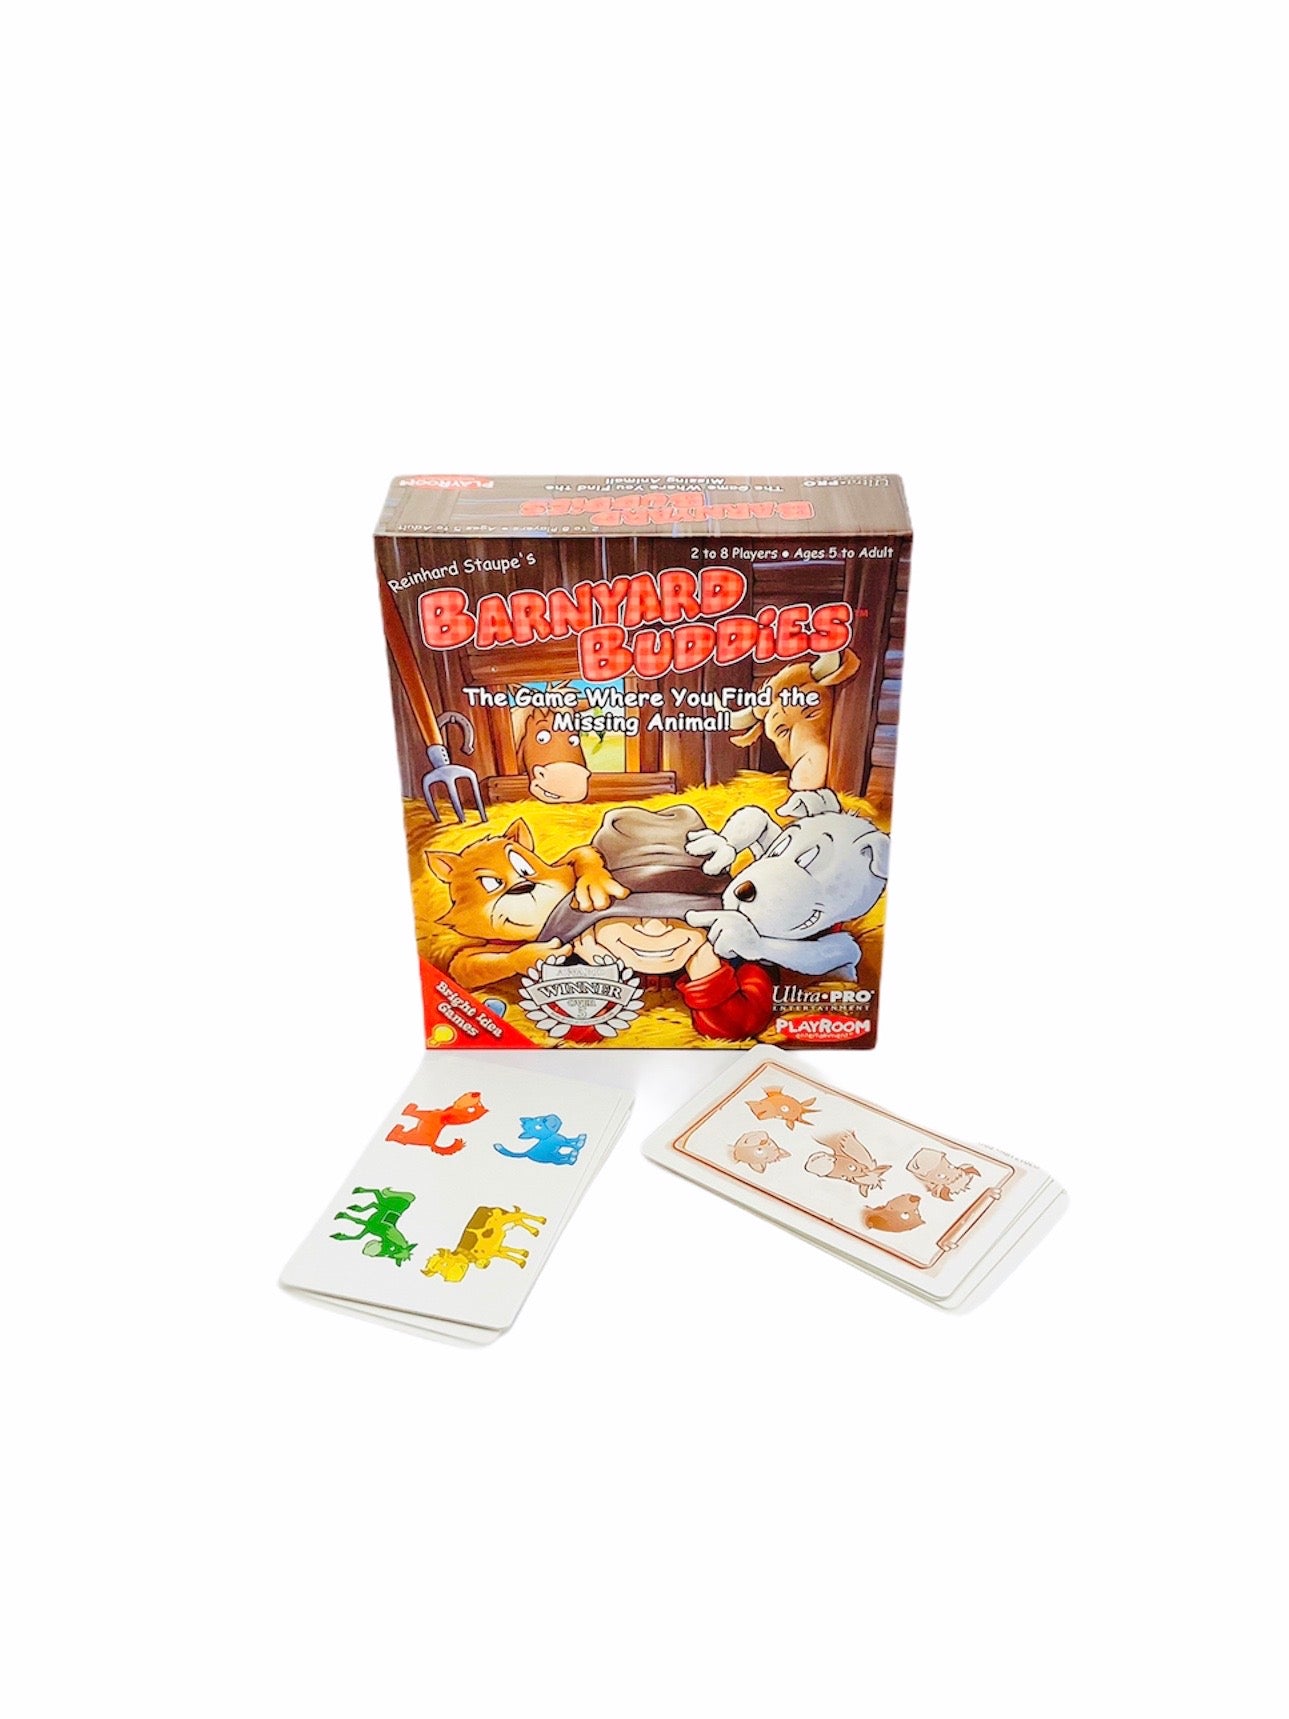 Playroom Barnyard Buddies with game cards and pieces laid in front of packaging box